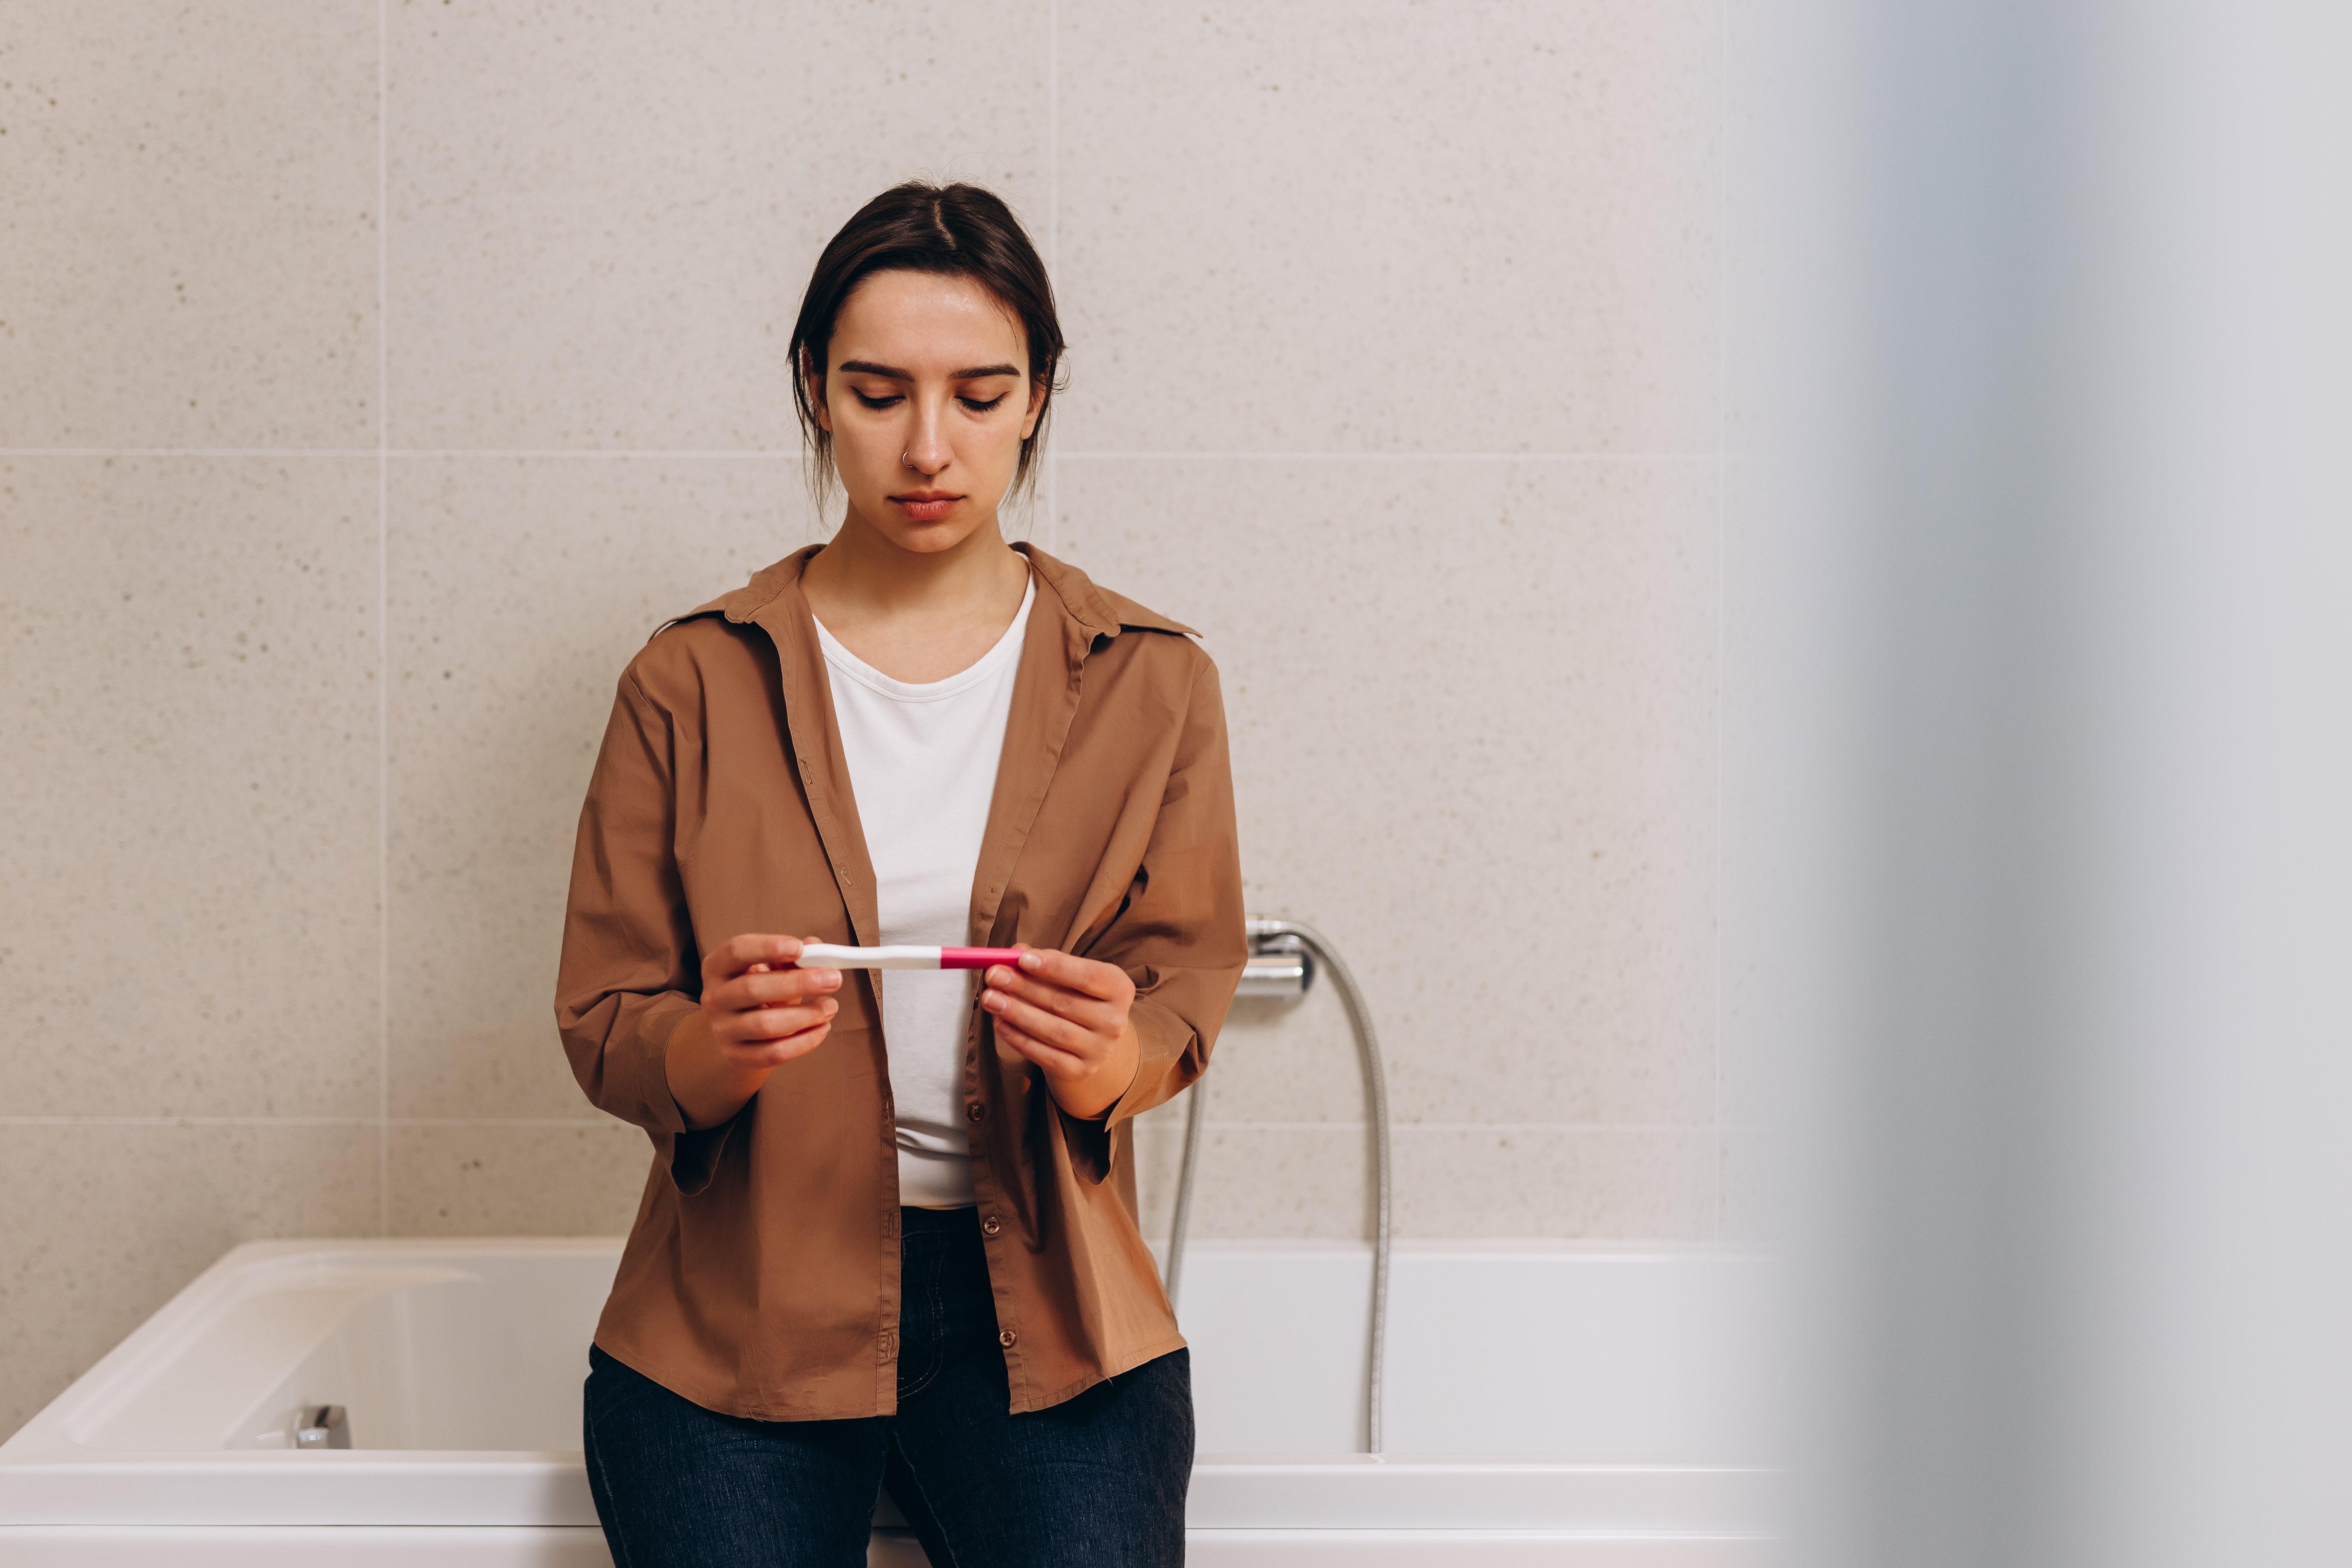 A young woman looking at a pregnancy test | Source: Shutterstock